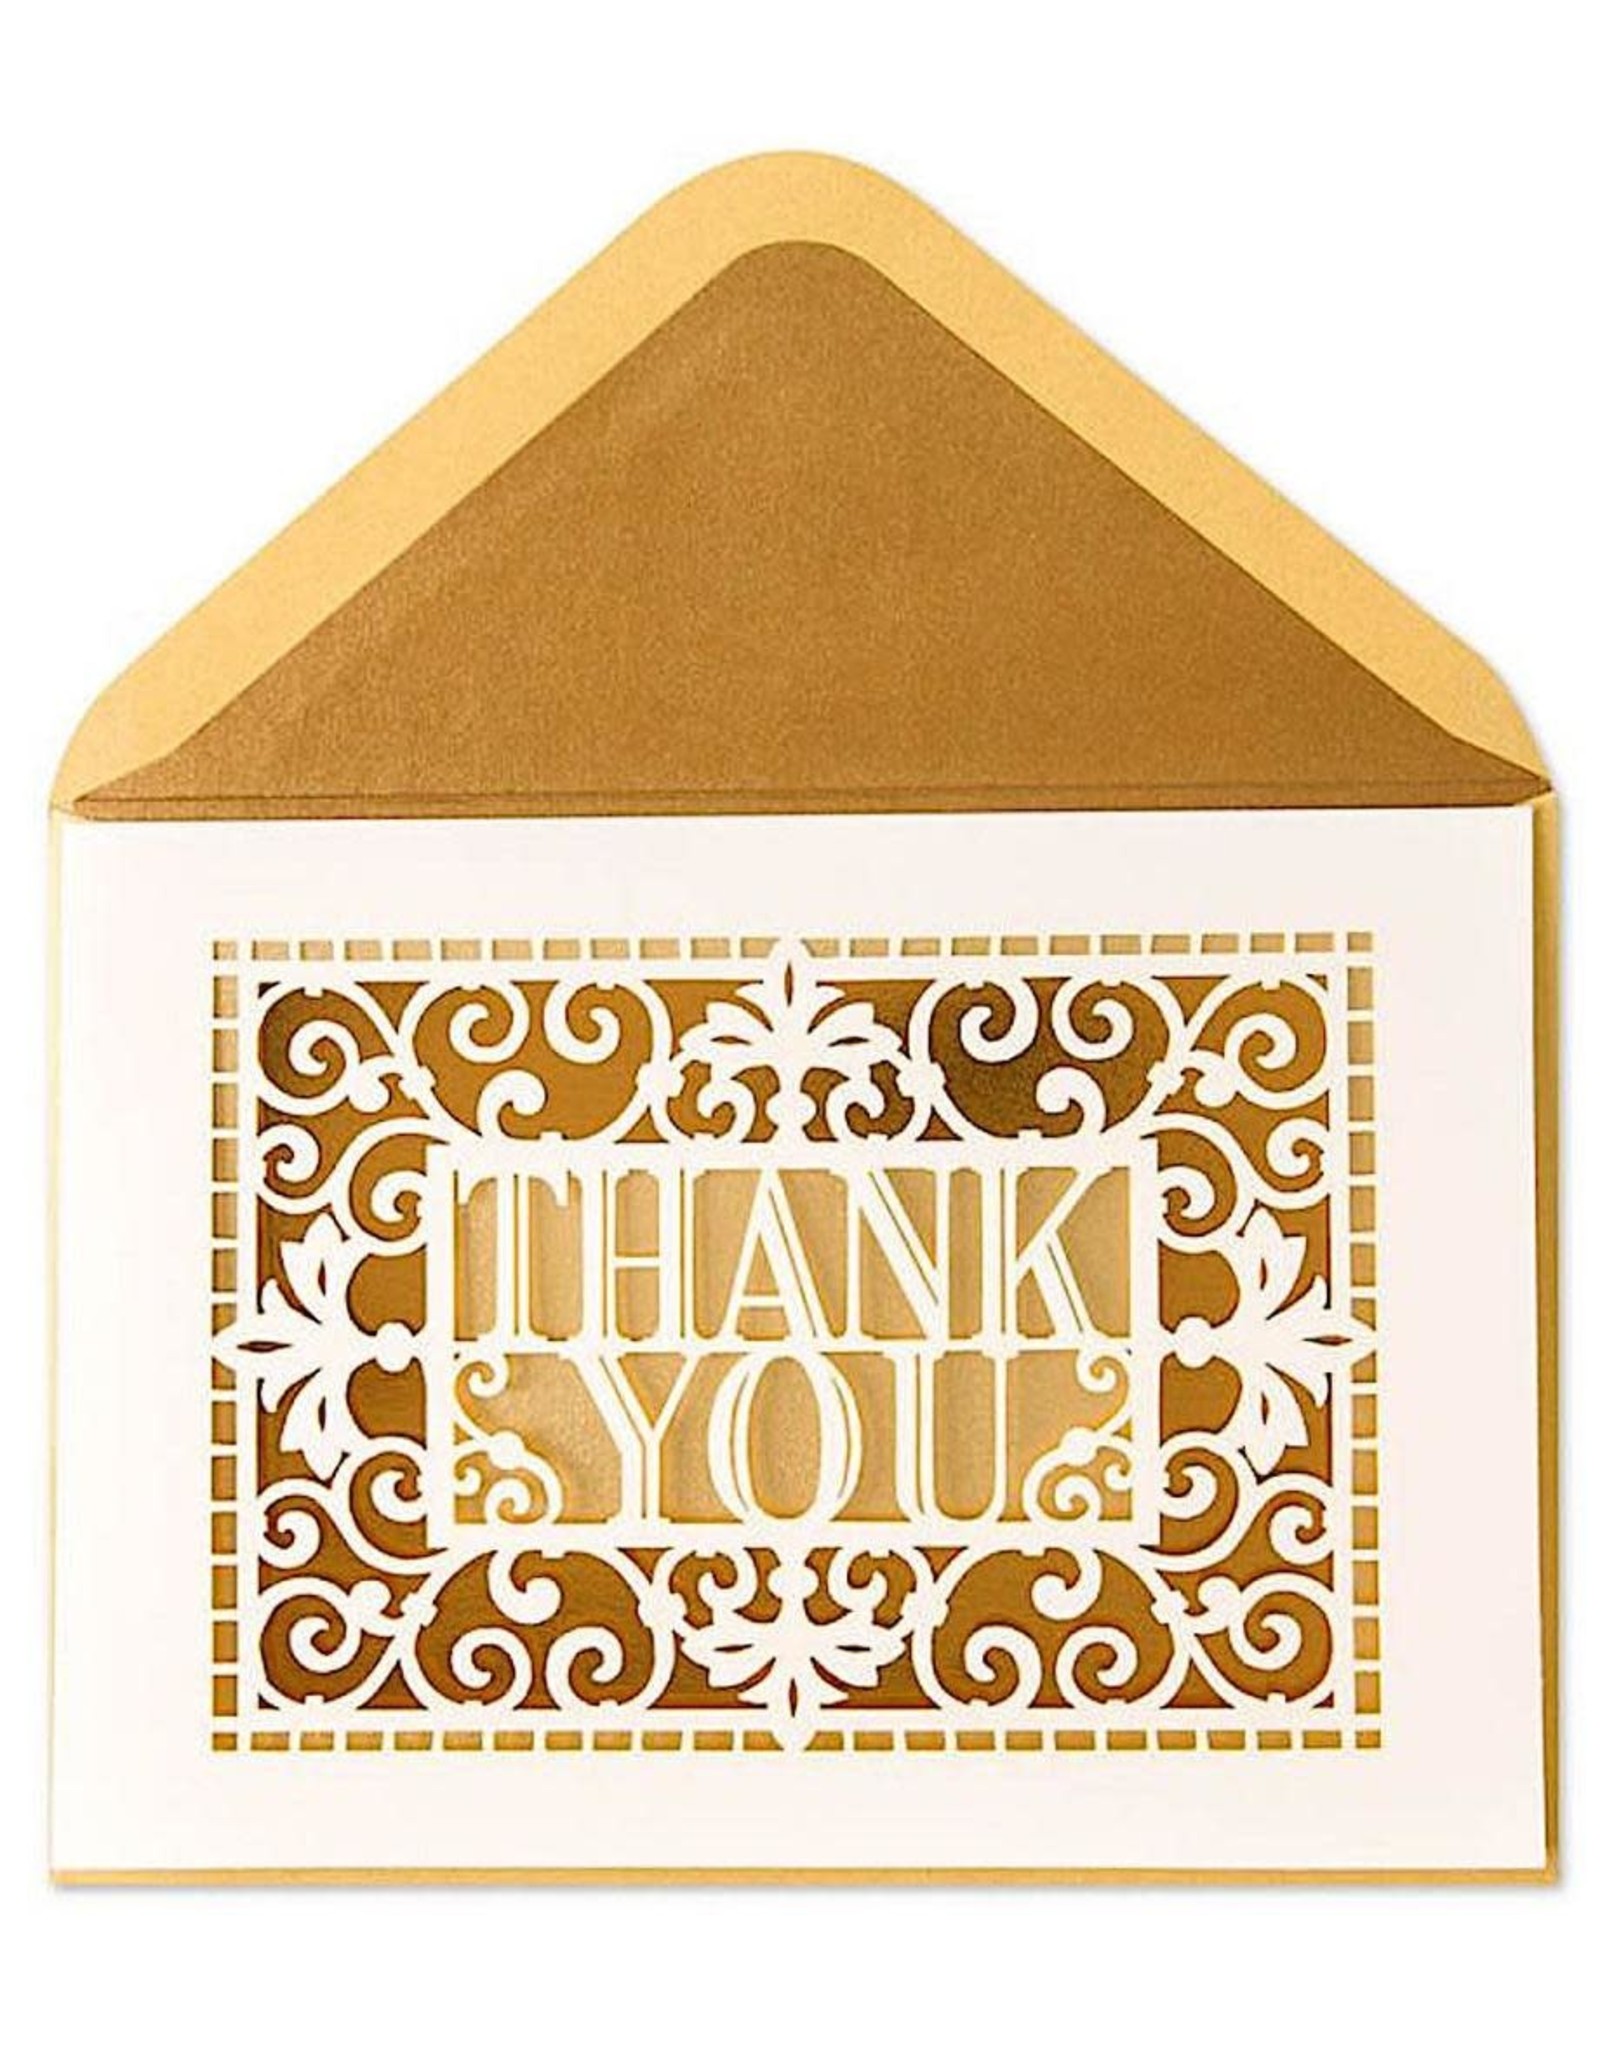 Details about   Papyrus Floral Laser Cut Wood THANKS Thank You Greeting Card SEALED 